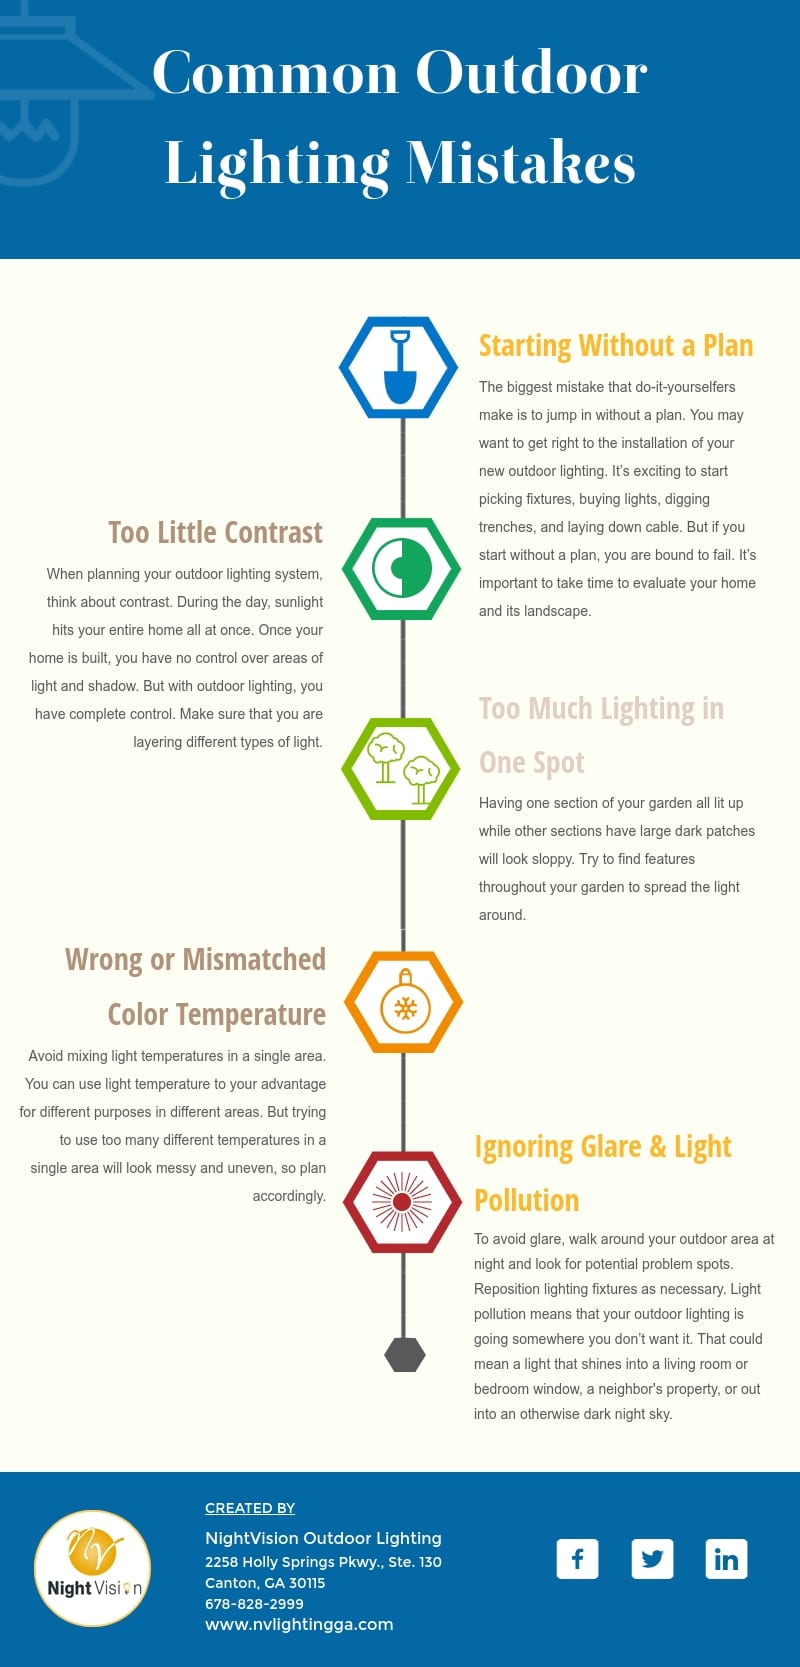 Common Outdoor Lighting Mistakes and How to Avoid Them [infographic]